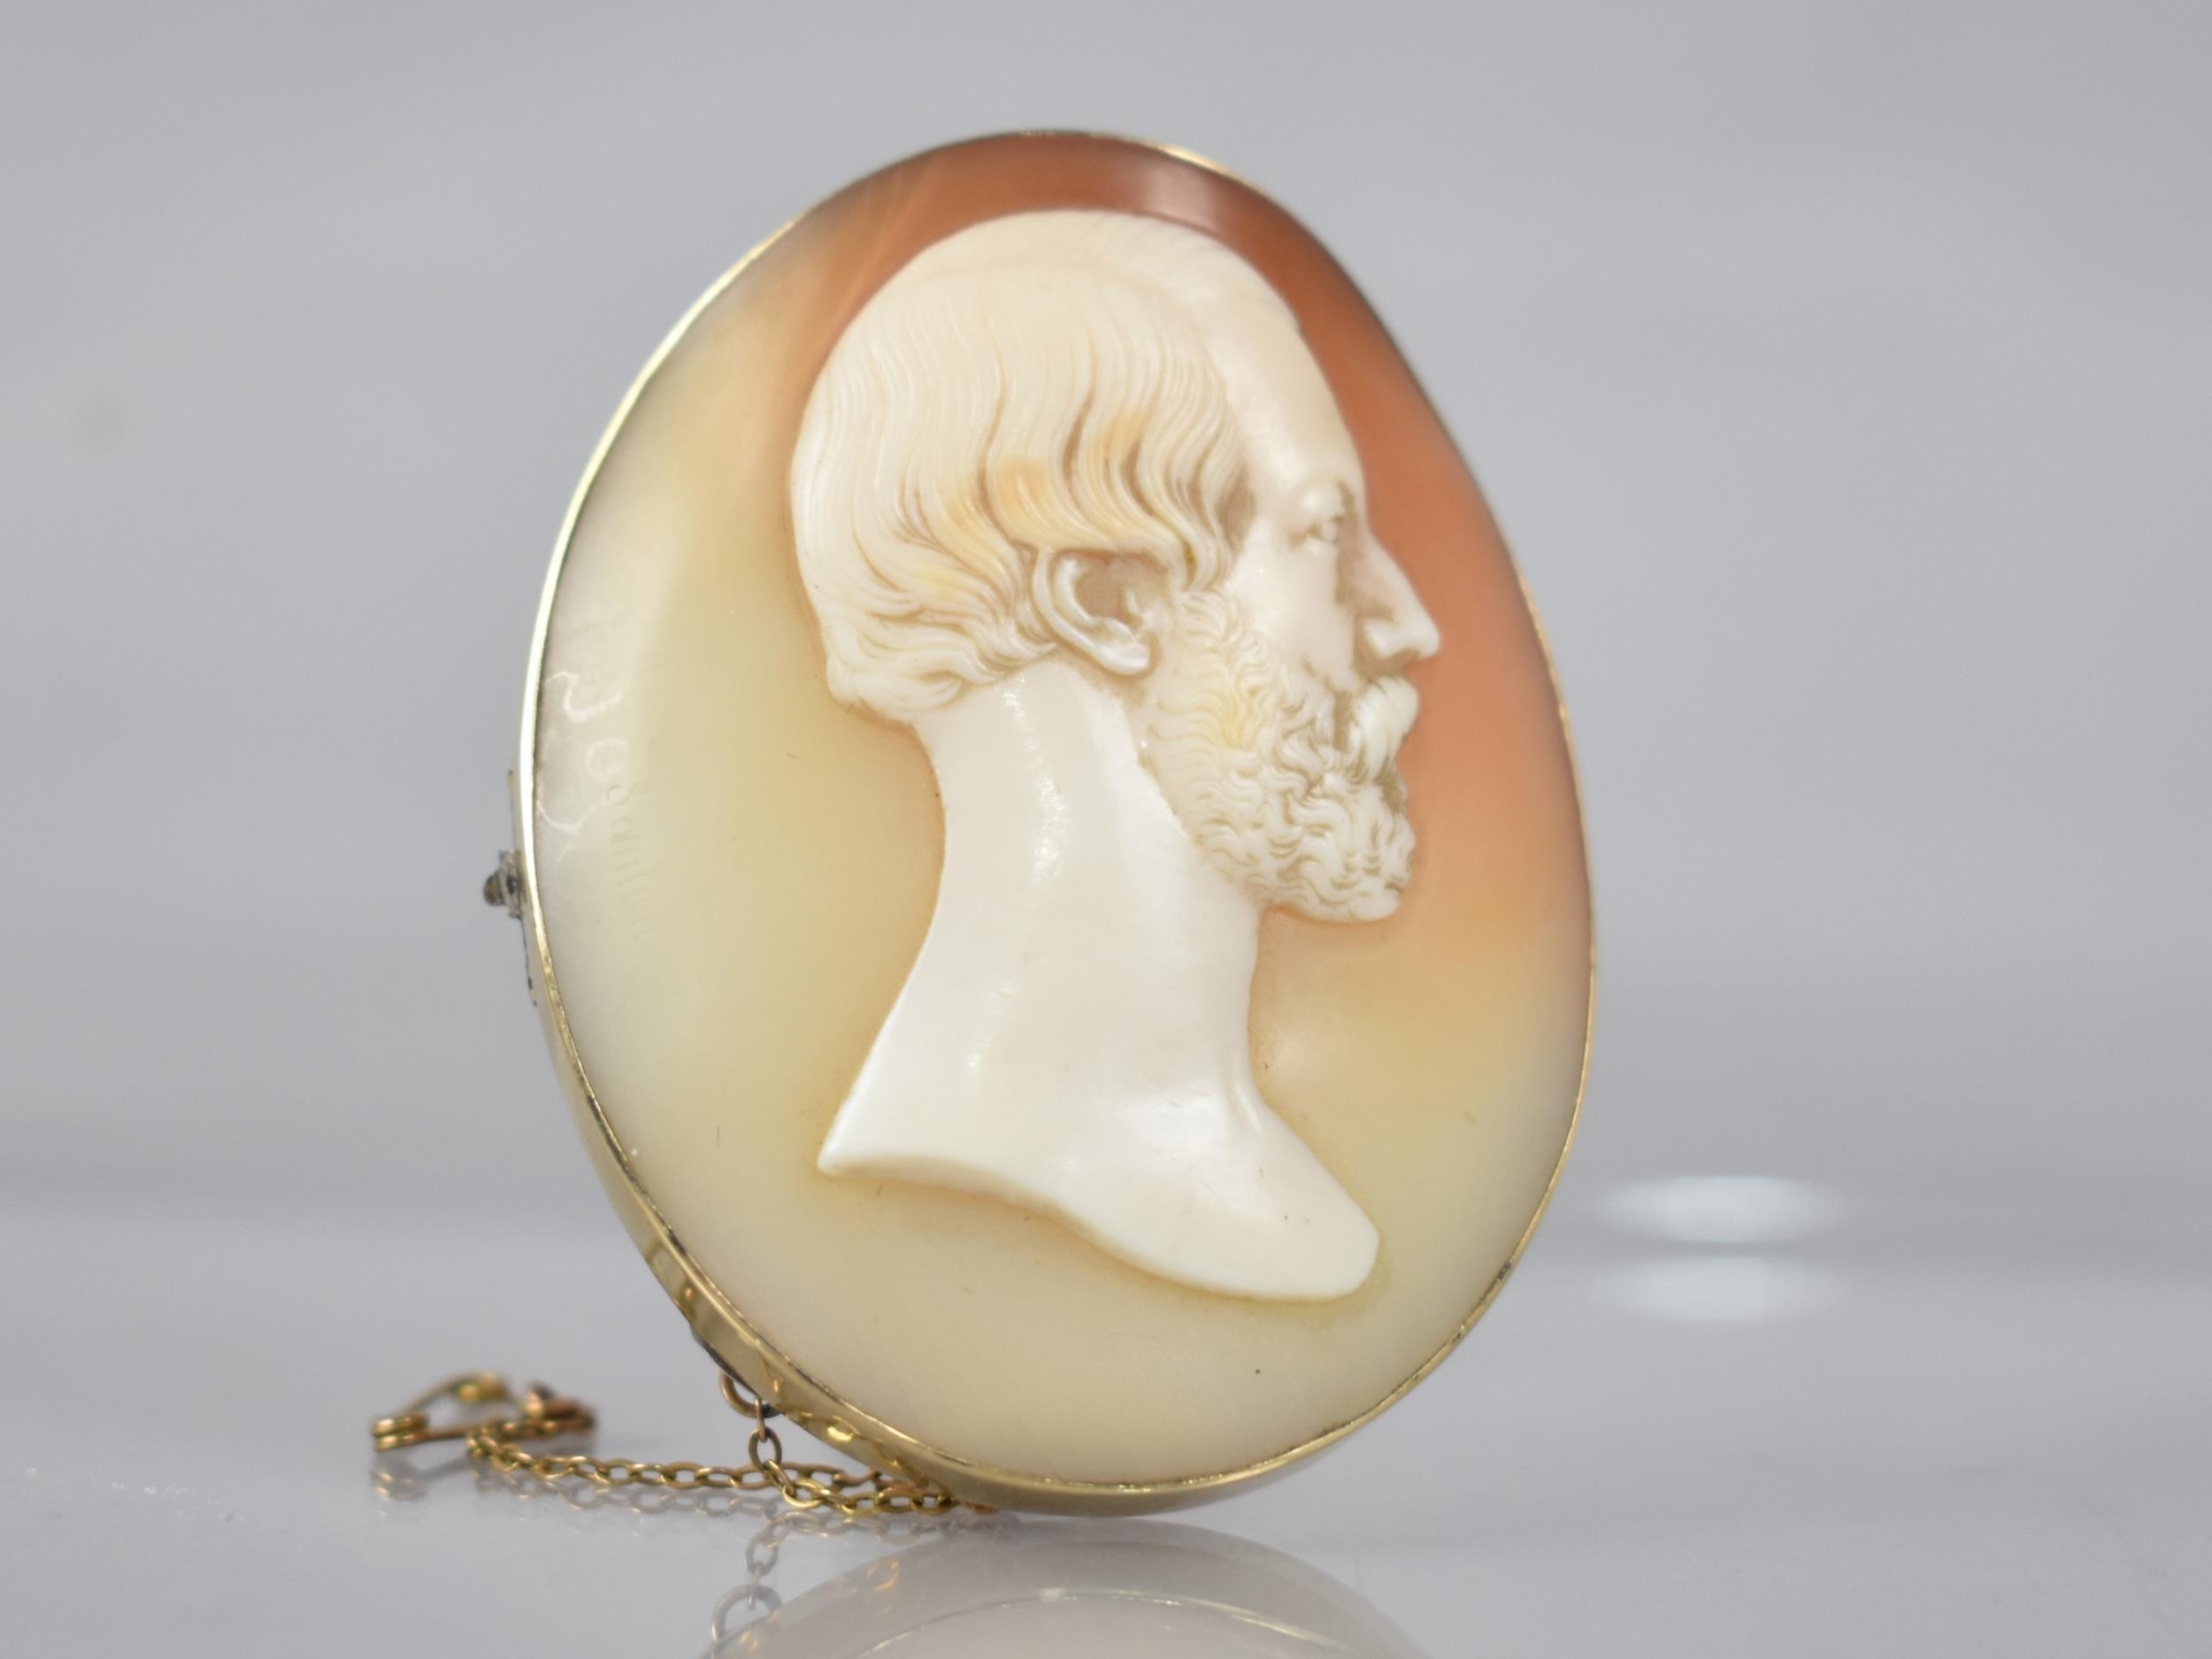 Saulini Workshop: An Early/Mid 19th Century Well Carved Italian Grand Tour Shell Cameo Depicting